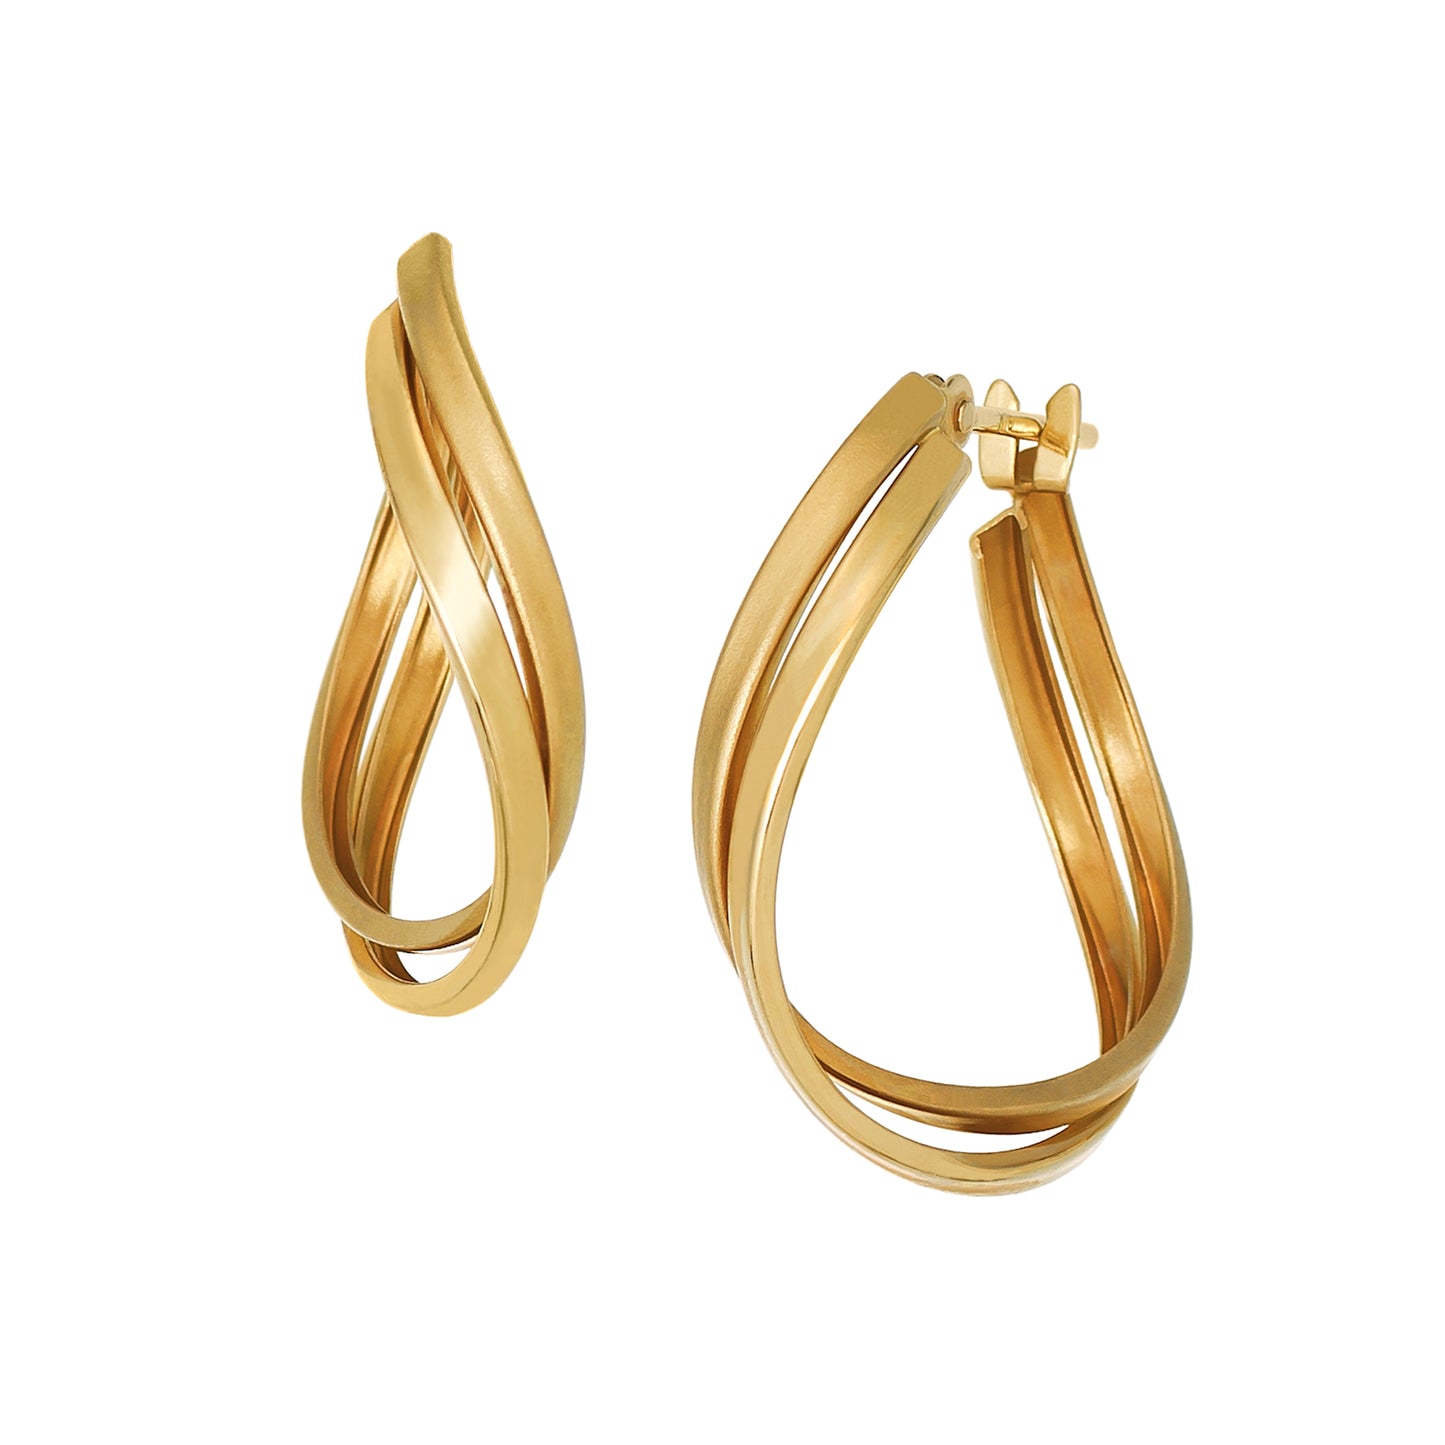 18K/10K Yellow Gold Twisted Twin Hoop Earrings (Large) - Product Image